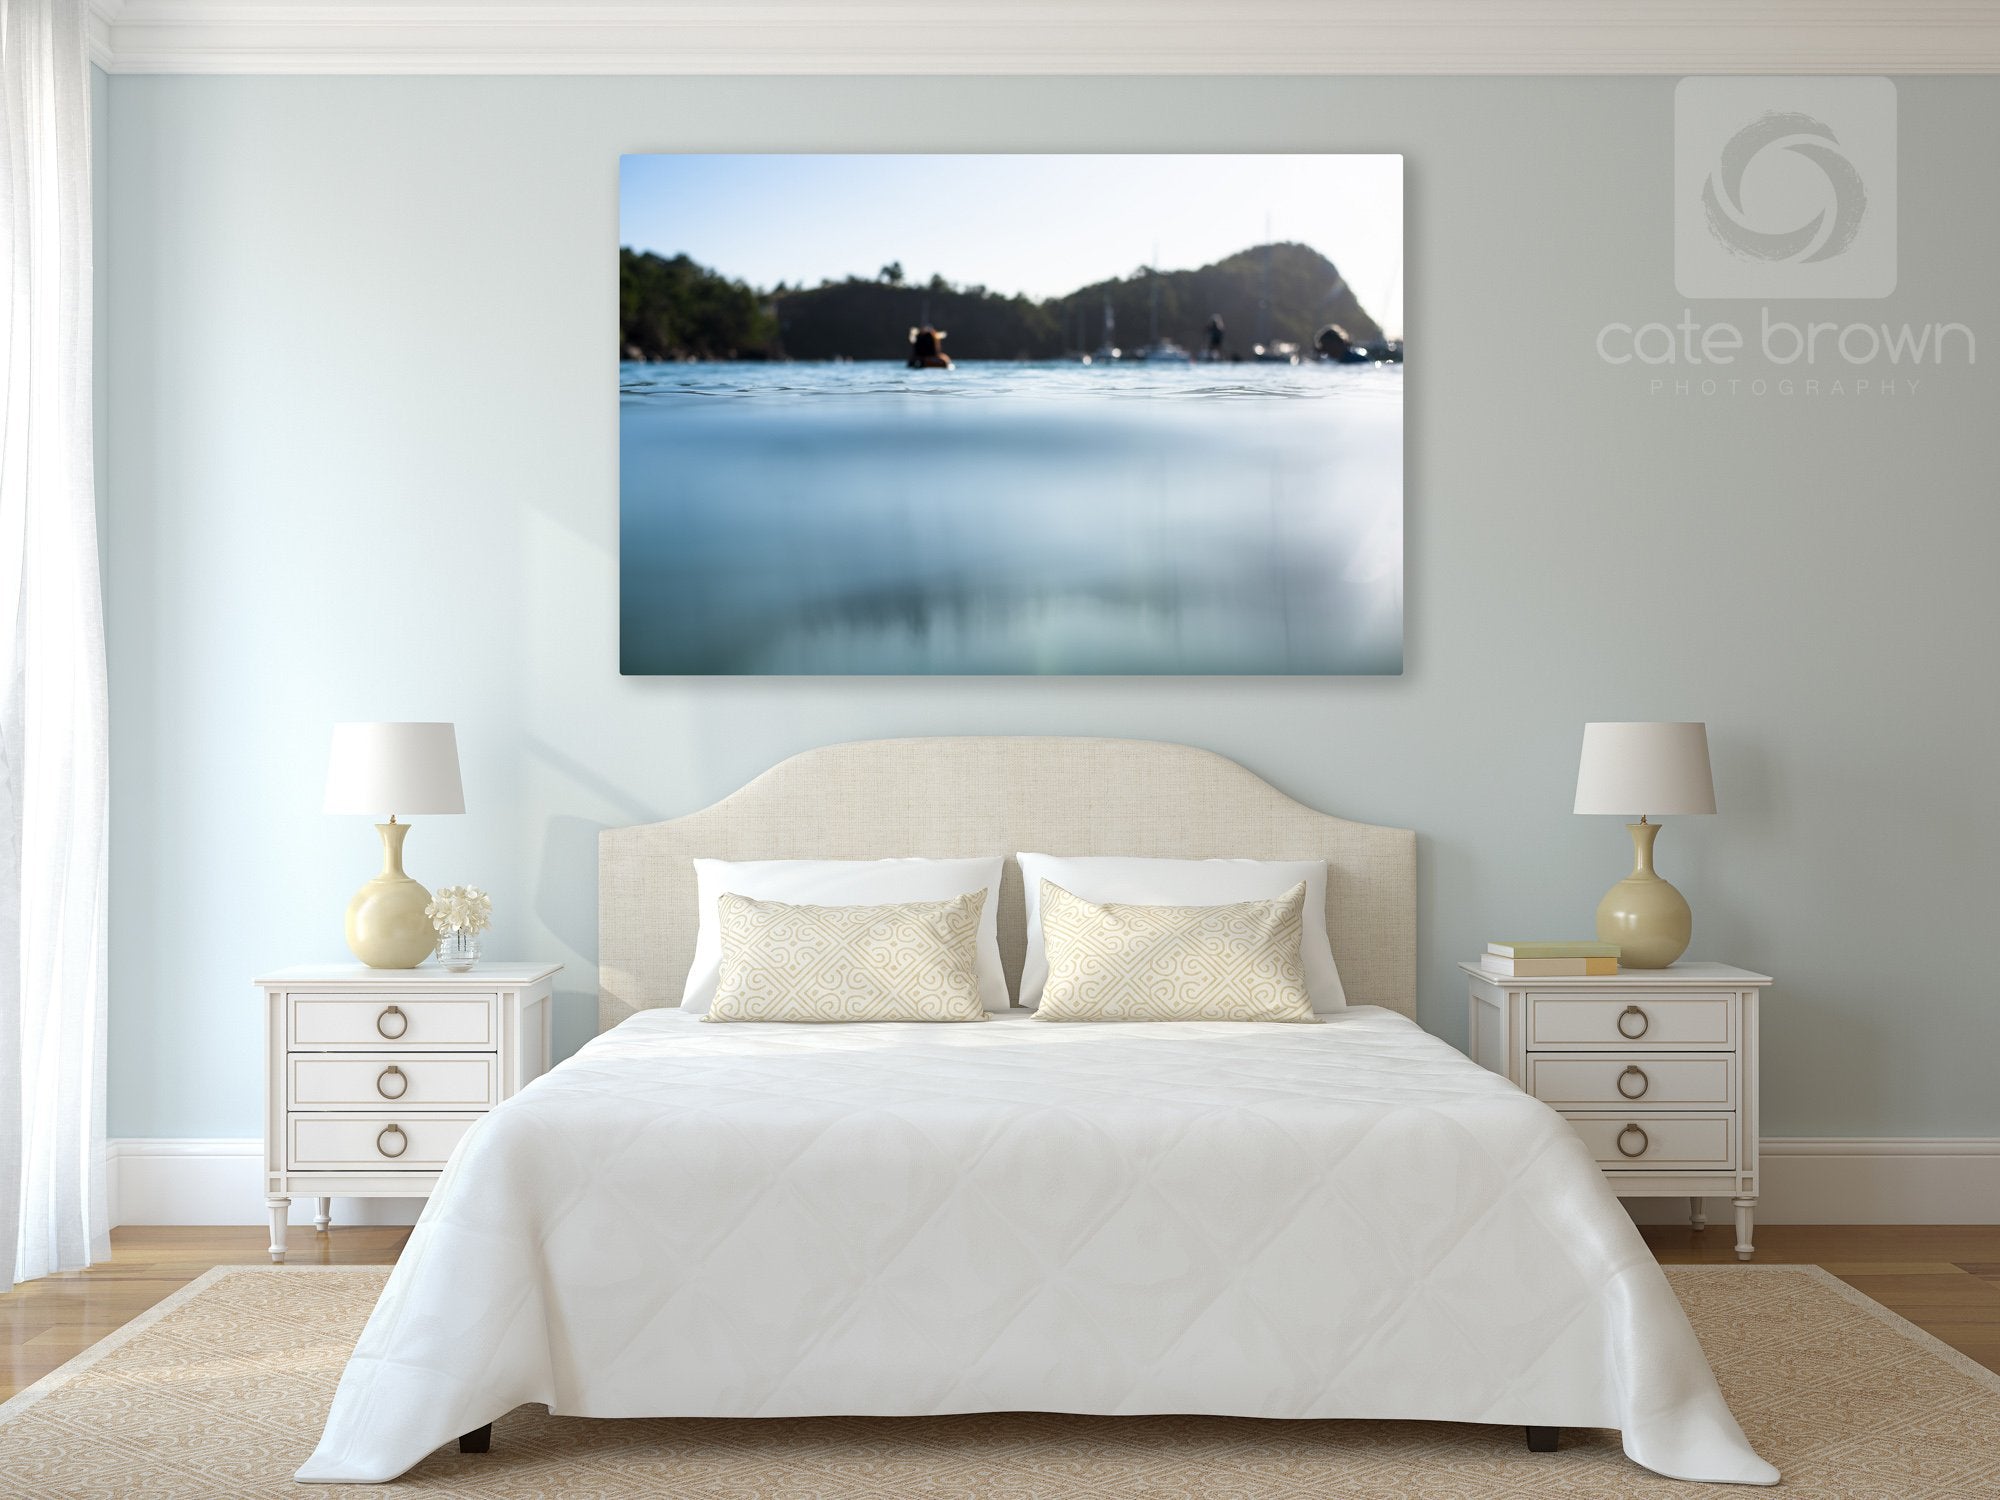 Cate Brown Photo Caribbean Lifestyle  //  Ocean Photography Made to Order Ocean Fine Art